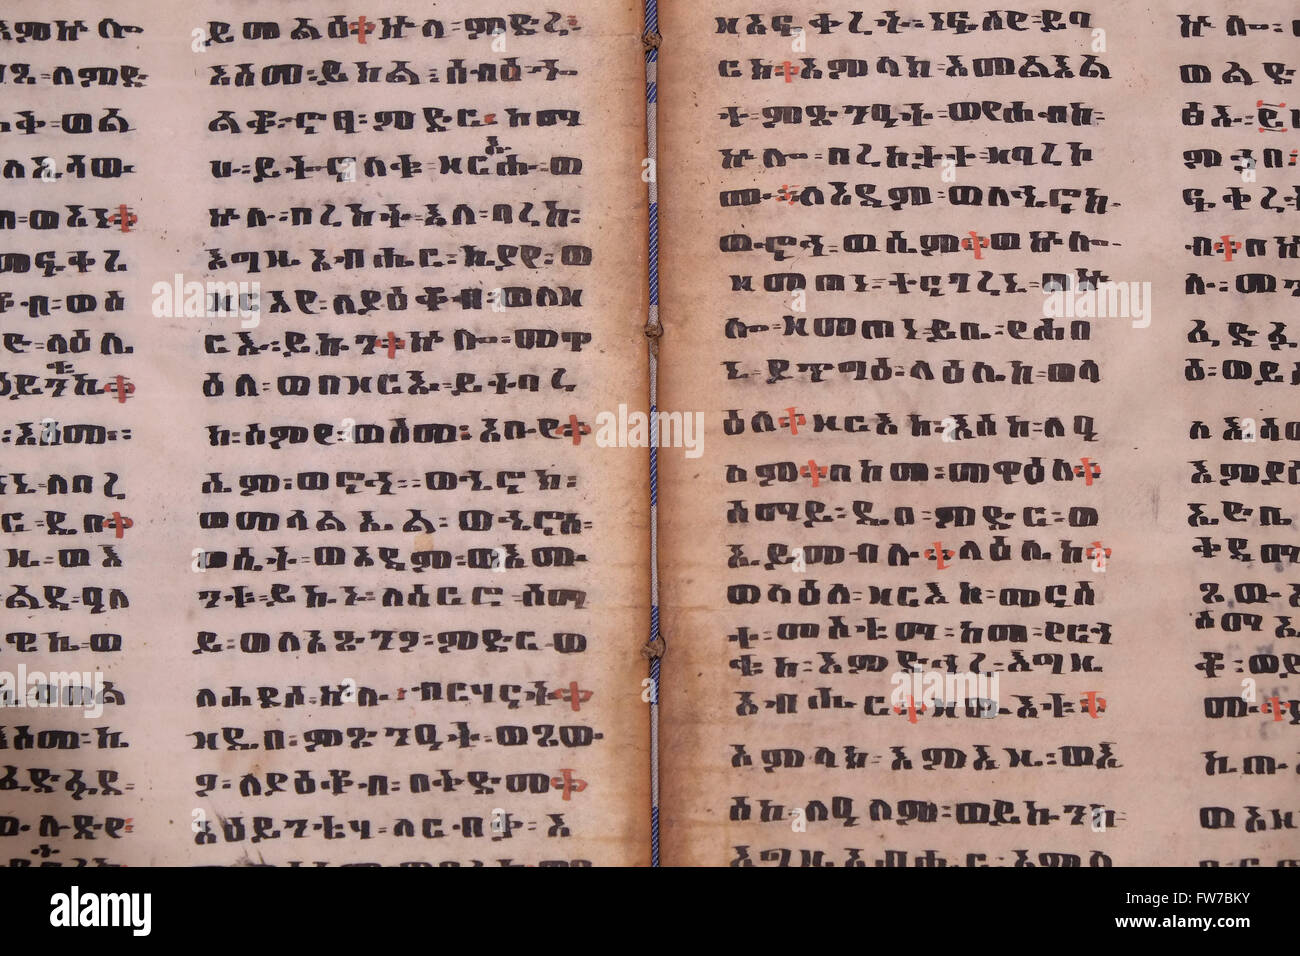 An old Ethiopian Torah, called Orit widely believed to be a translation of a Greek translation of the Bible written on parchment in Geez an ancient South Semitic language that originated in the northern region of Ethiopia and Eritrea. Today, Geez remains only as the main language used in the liturgy of the Ethiopian Orthodox Tewahedo Church, the Eritrean Orthodox Tewahedo Church, the Ethiopian Catholic Church, and the Beta Israel Jewish community. Stock Photo